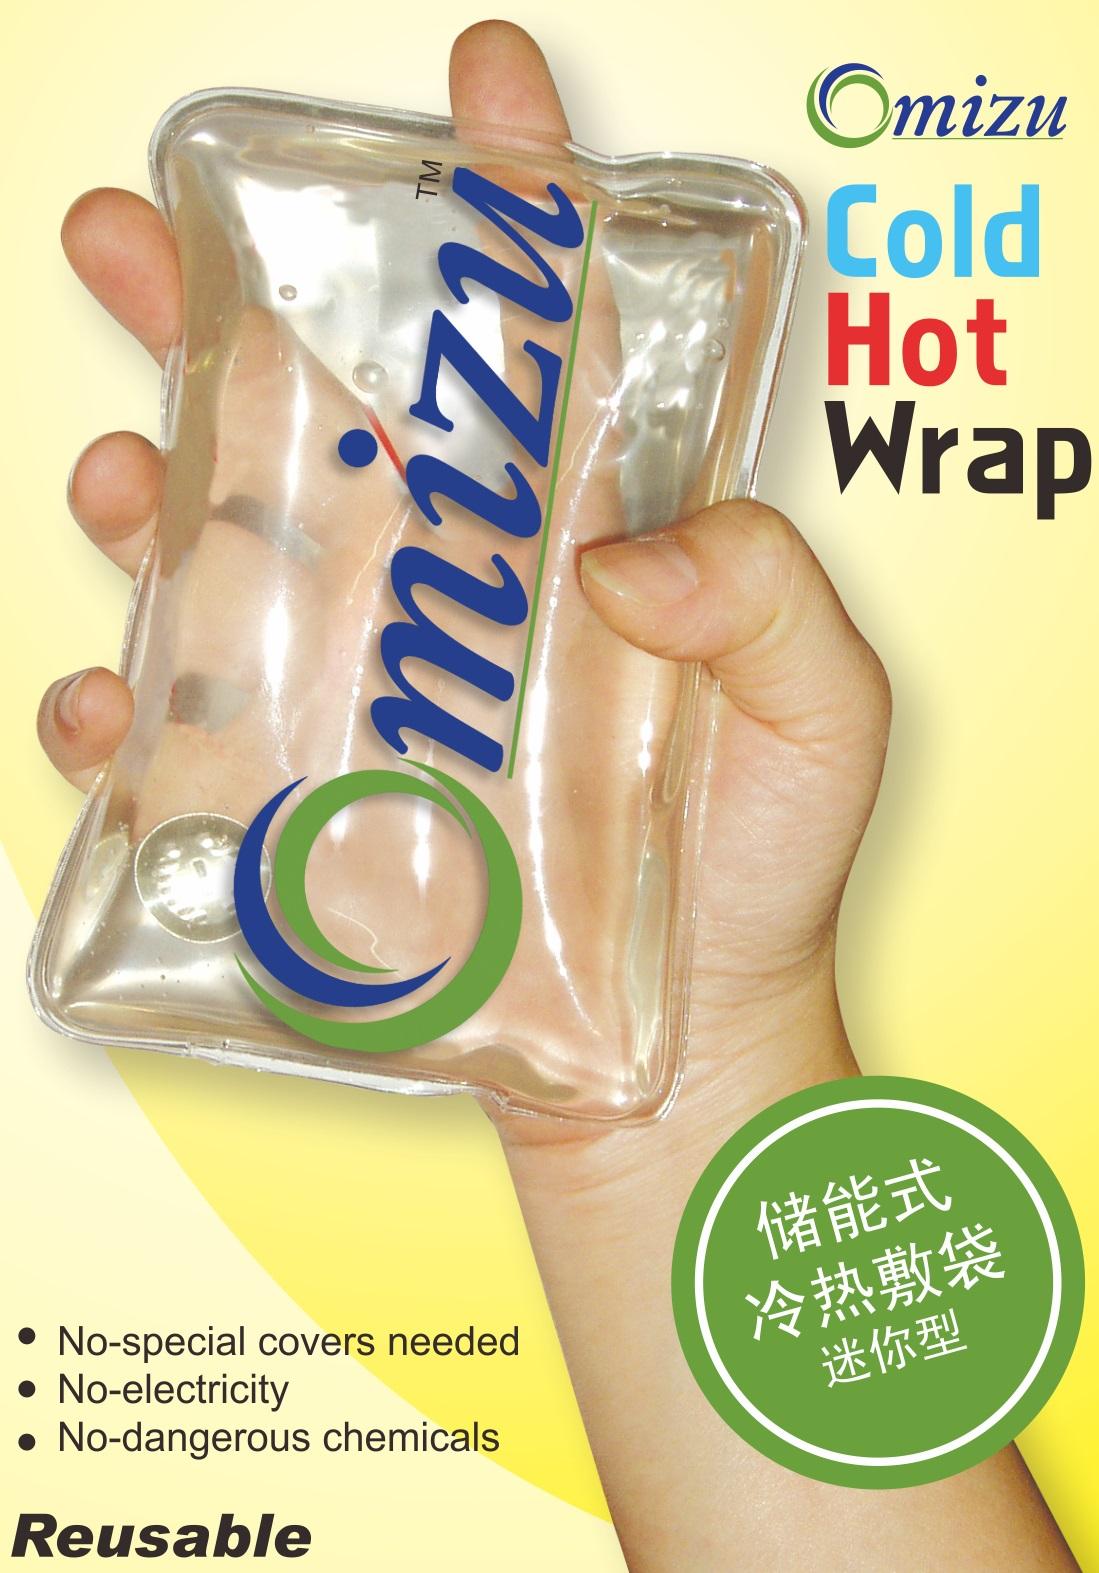 Cold Hot Wrap